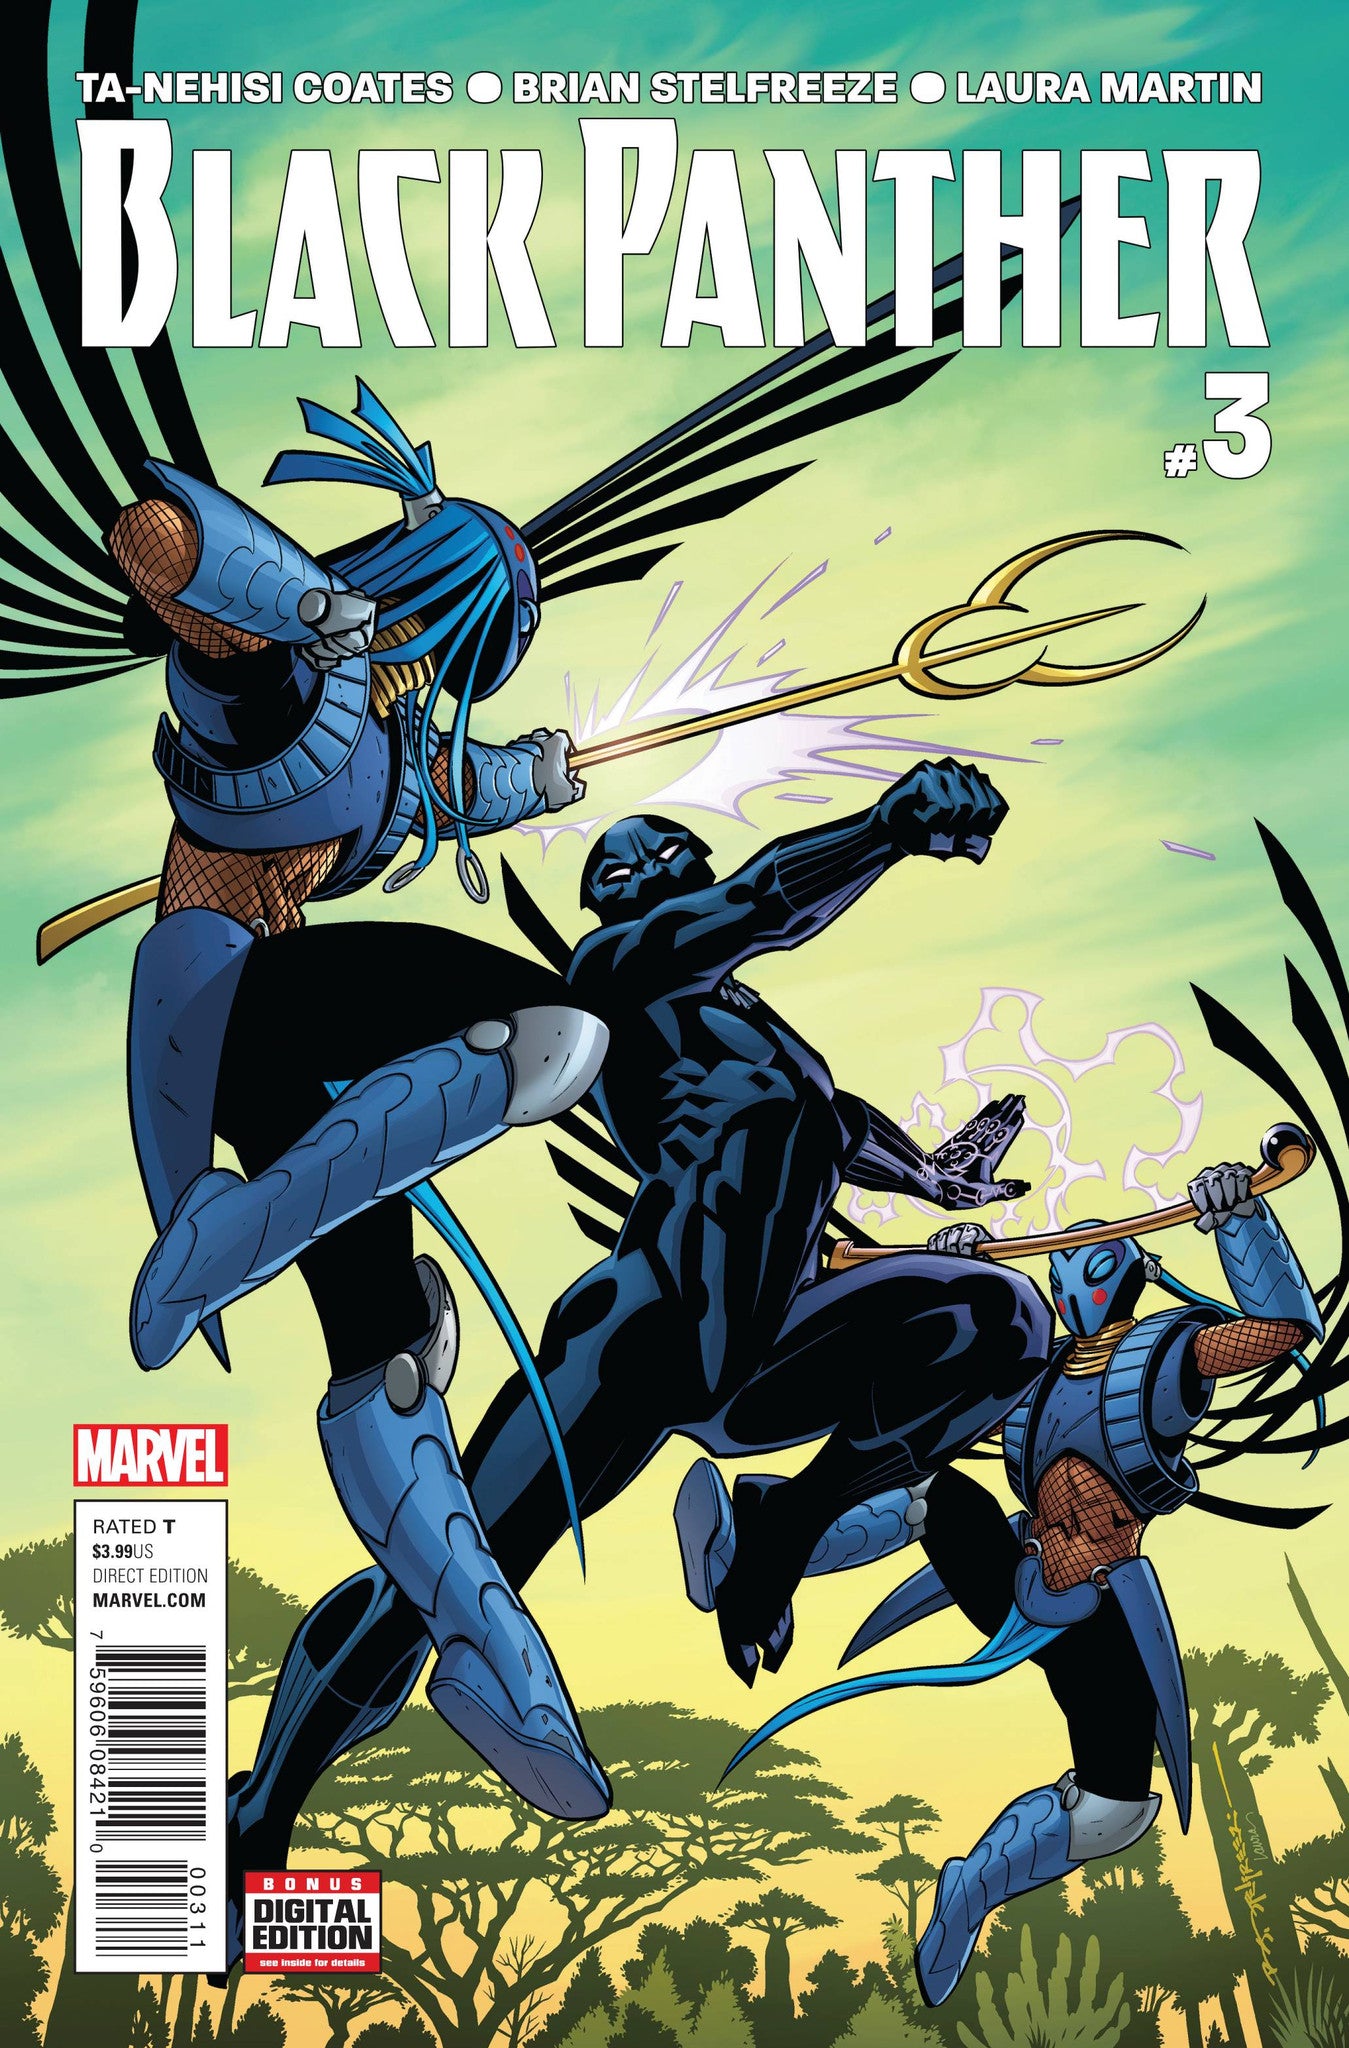 BLACK PANTHER #3 COVER